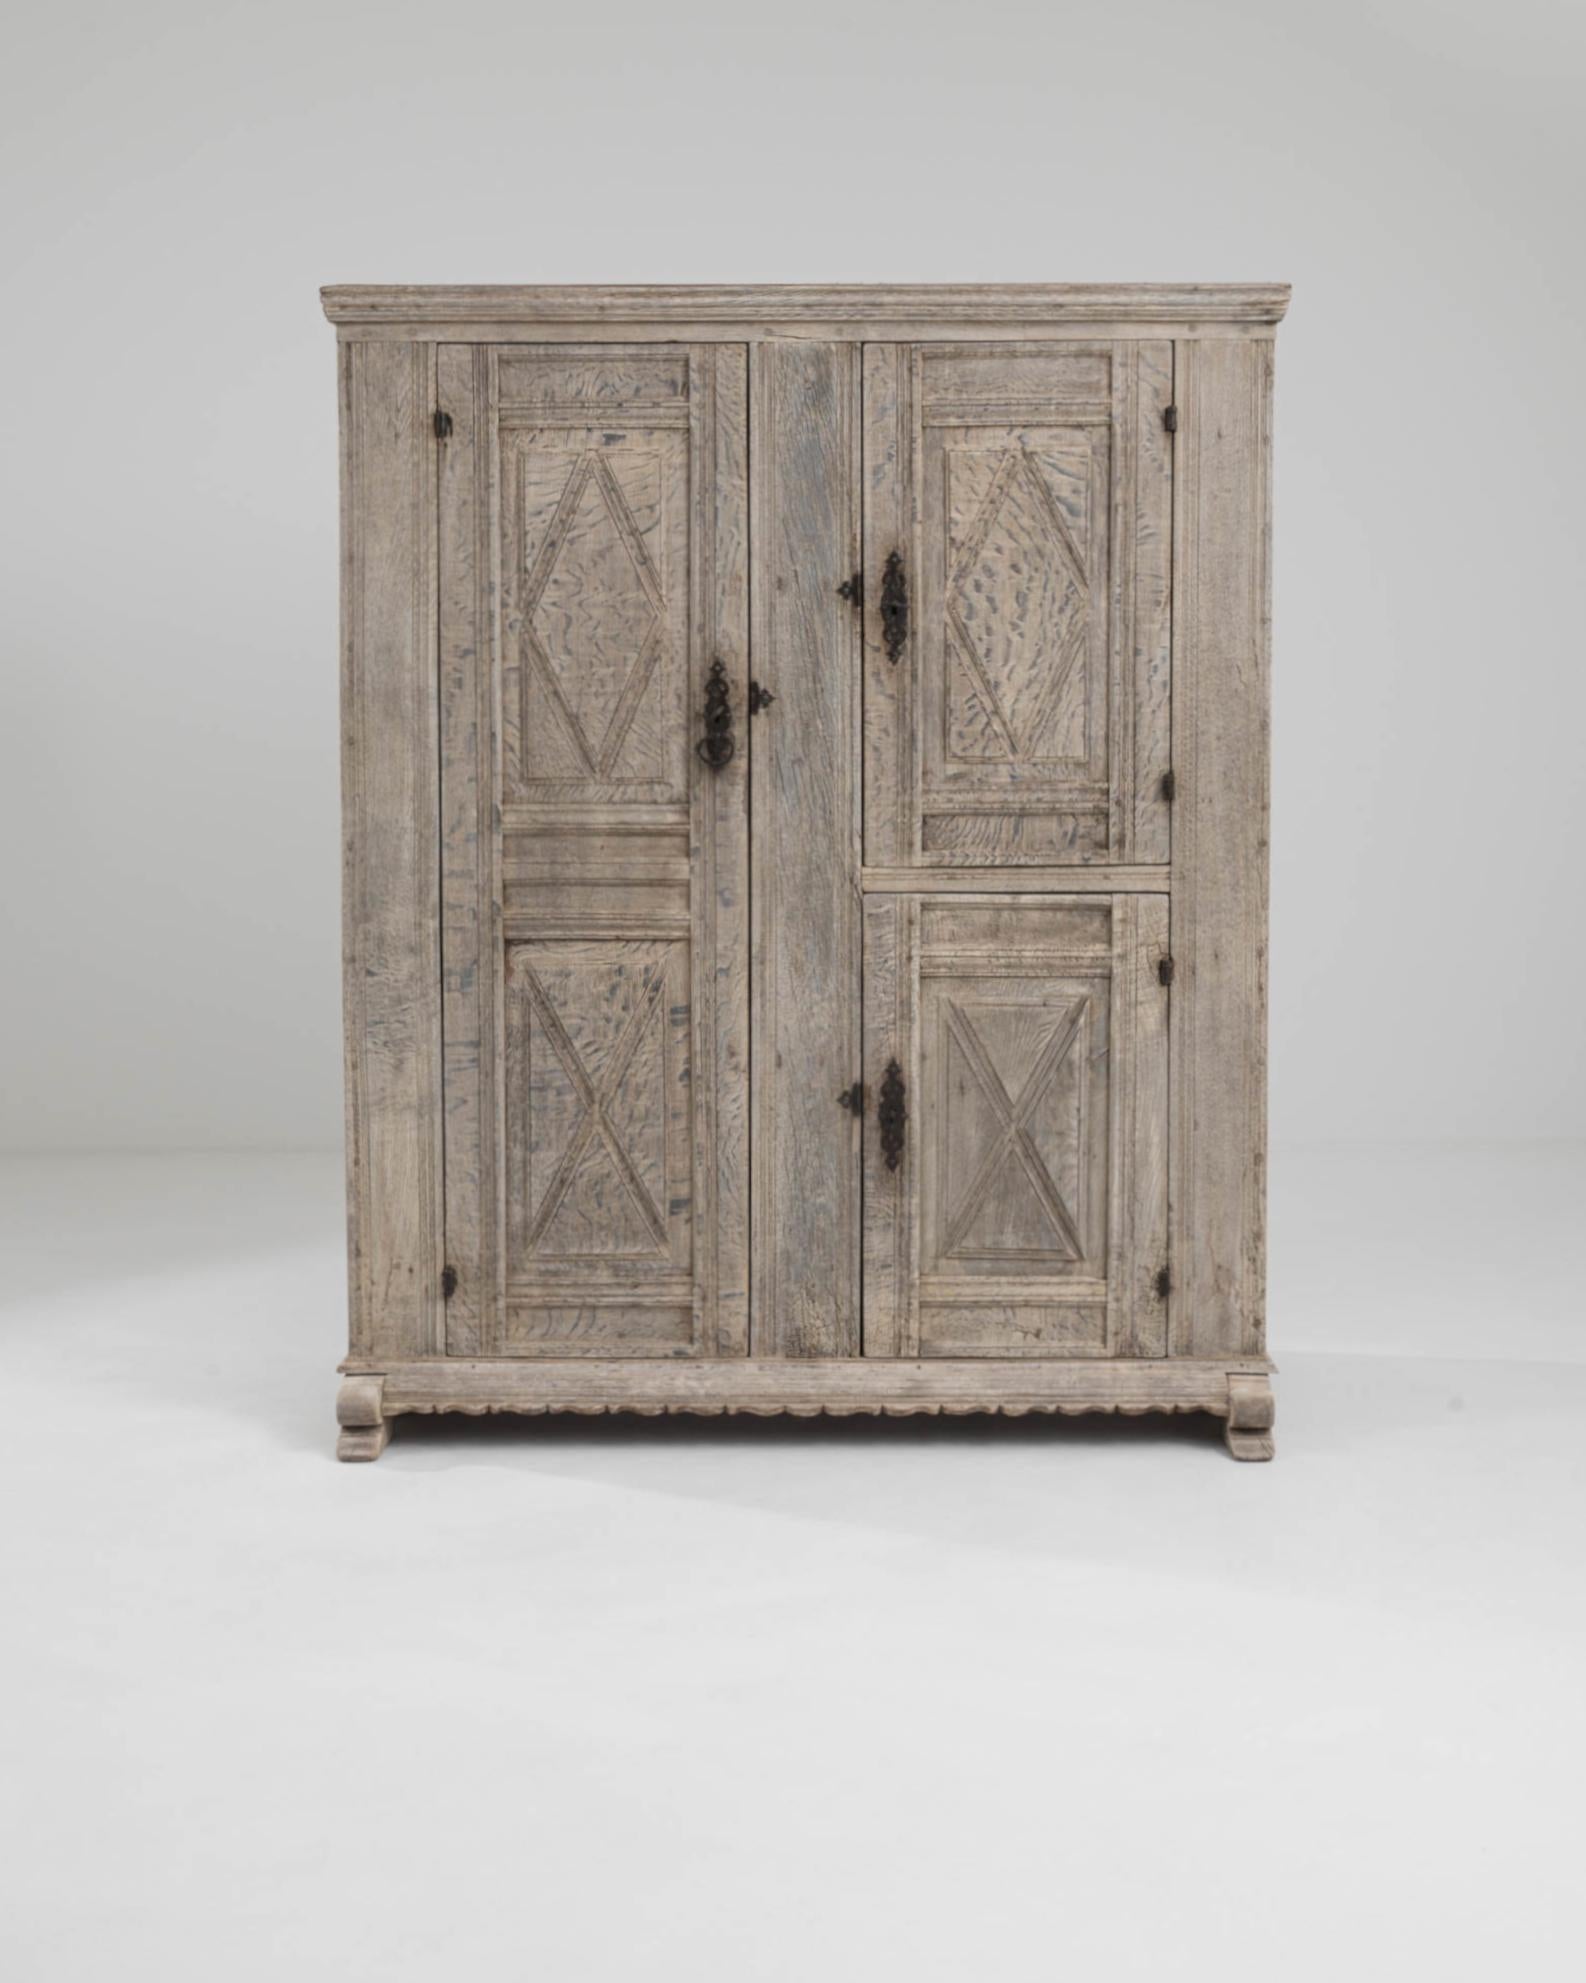 A wooden cabinet made in Germany circa 1800. Two lavishly sculpted doors, inscribed with diamonds and criss-crossing motifs, swing outwards to reveal two sets of asymmetrically positioned shelves. Ingeniously devised to store and protect the clothes